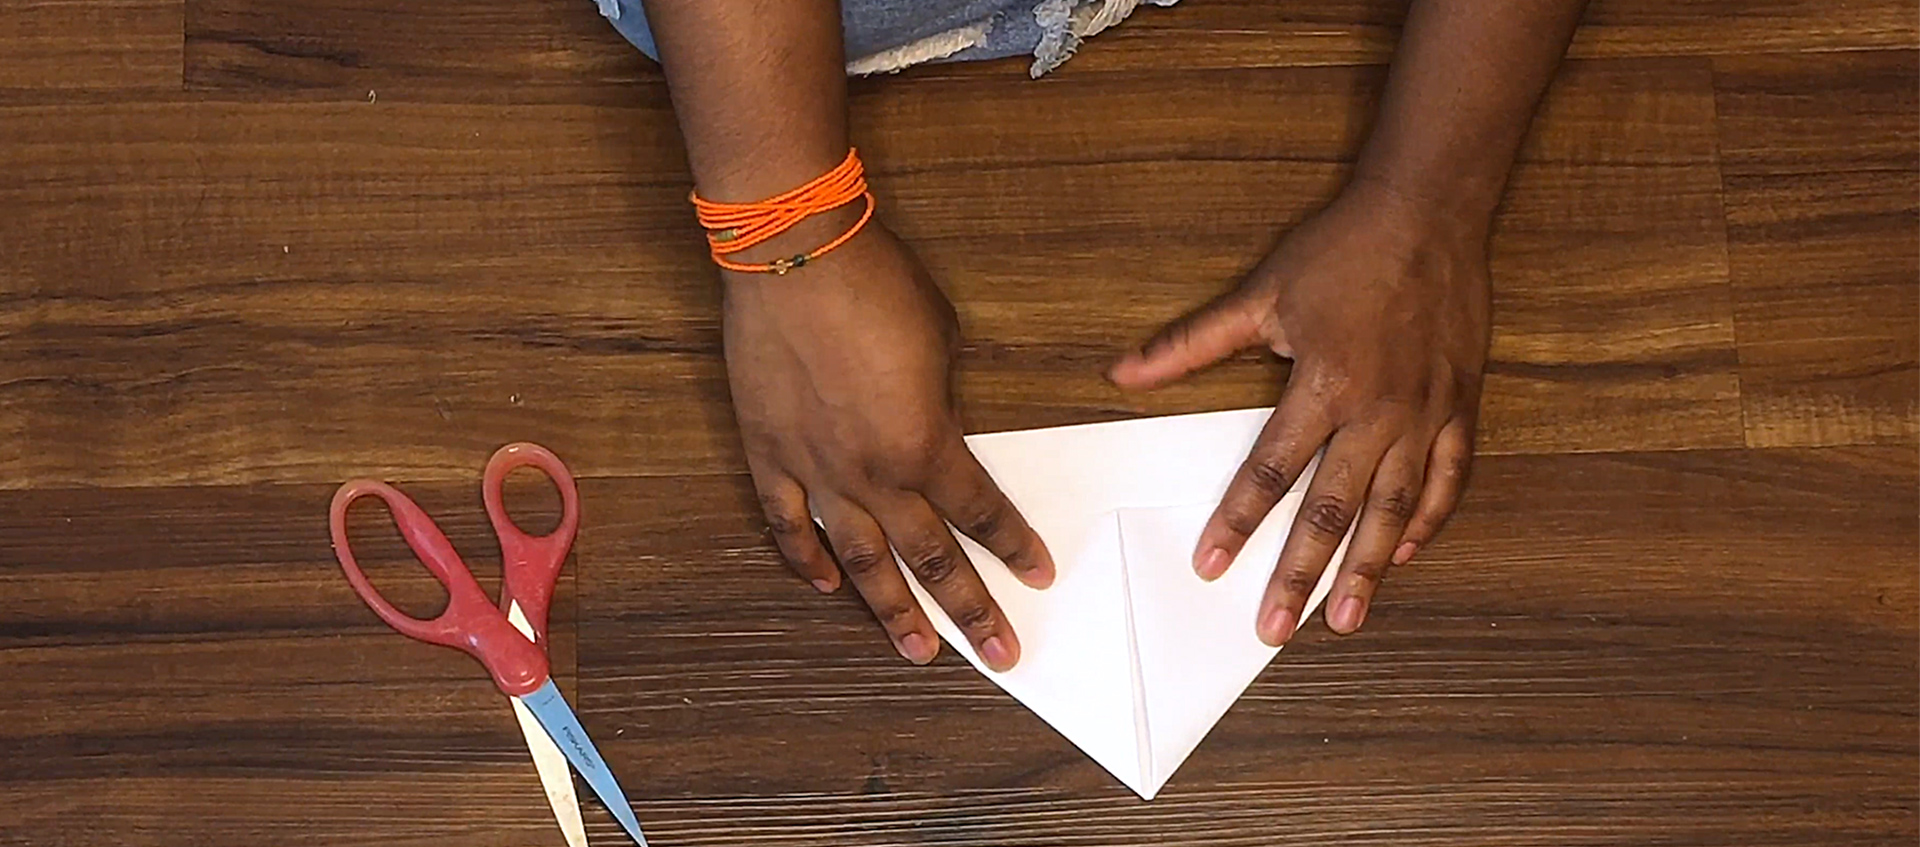 The hands of Claudia Owusu making a paper boat